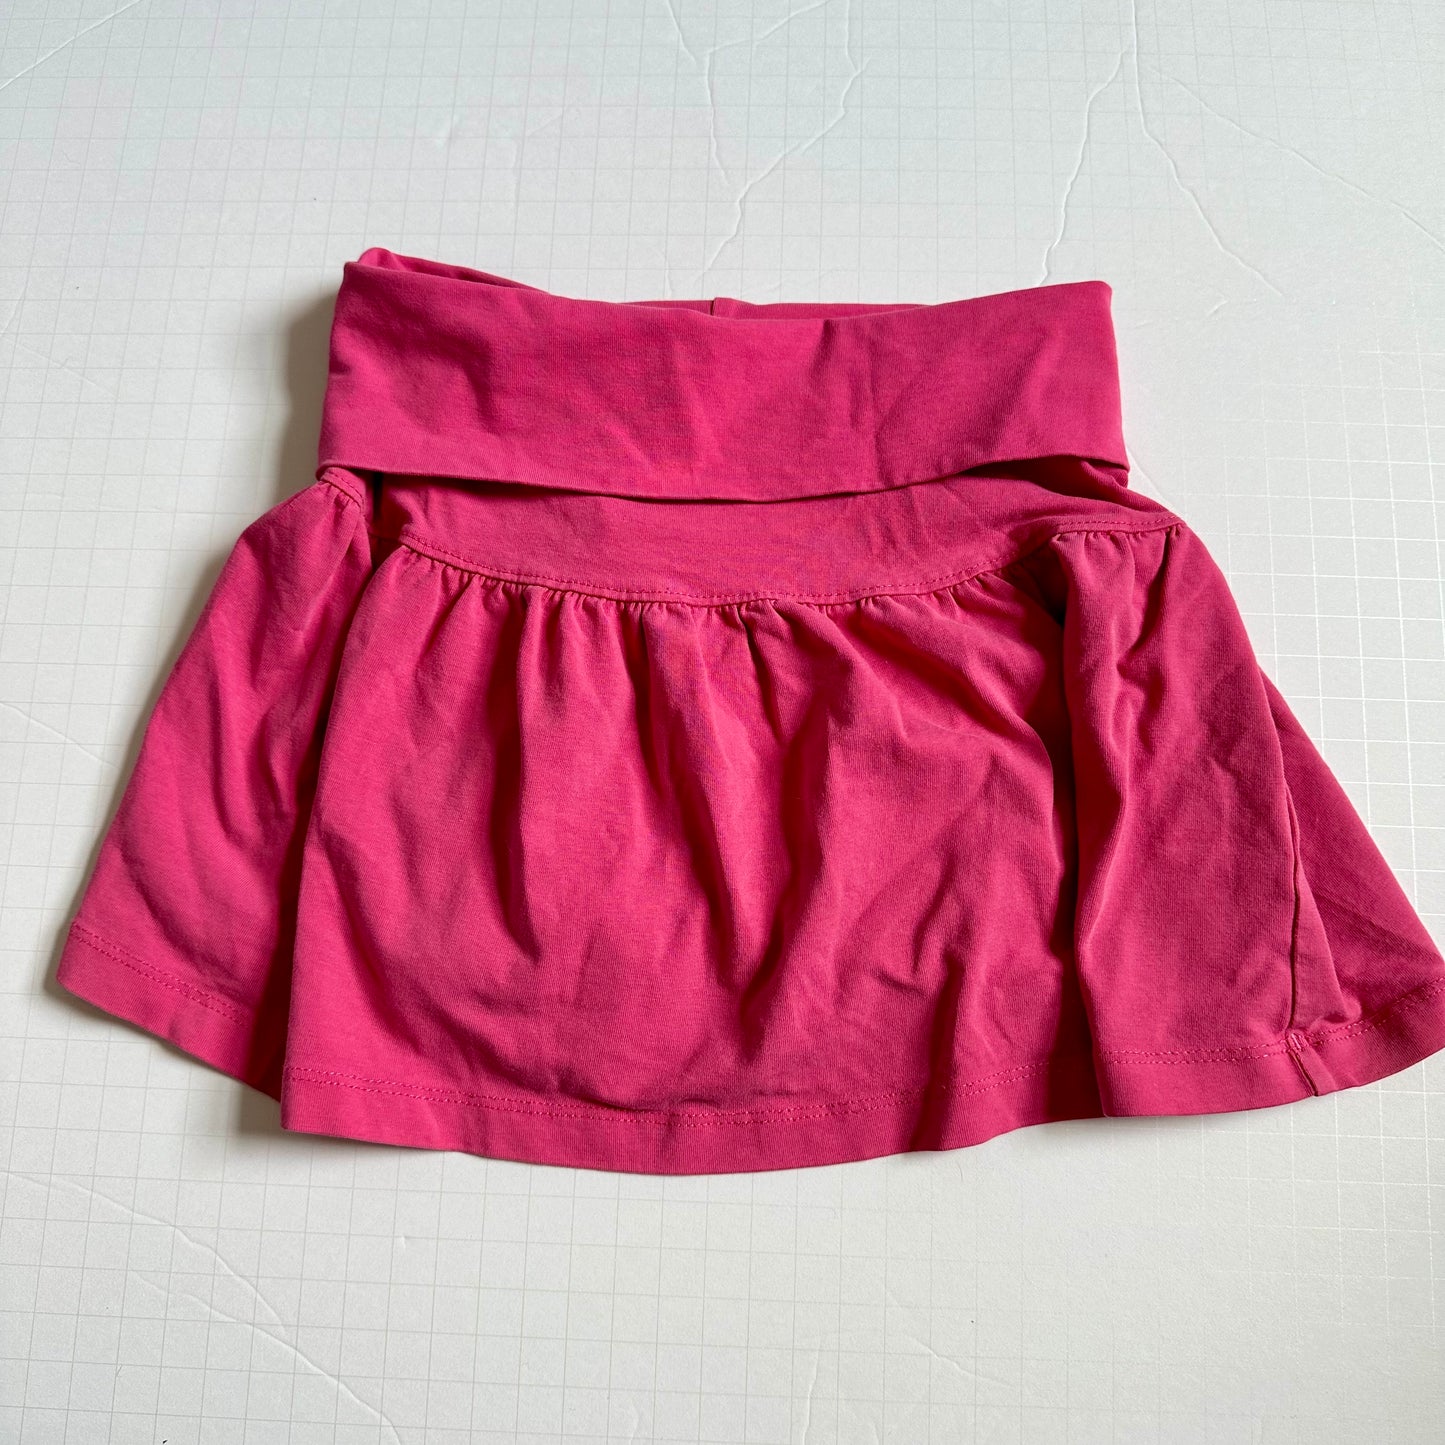 4T Hanna Andersson Pink Skirt